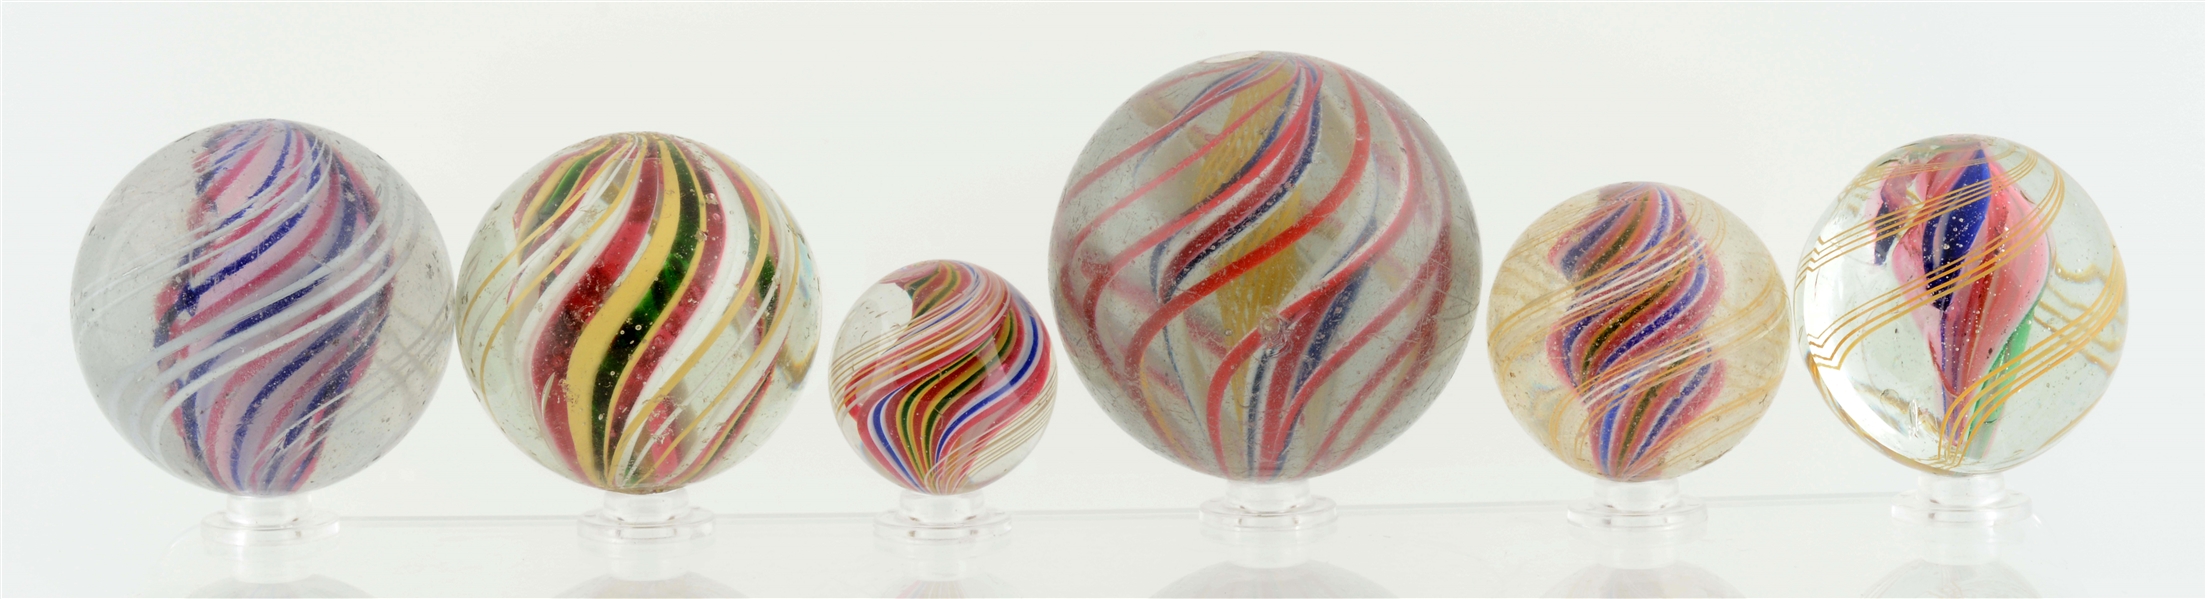 LOT OF 6: SWIRL MARBLES.                          